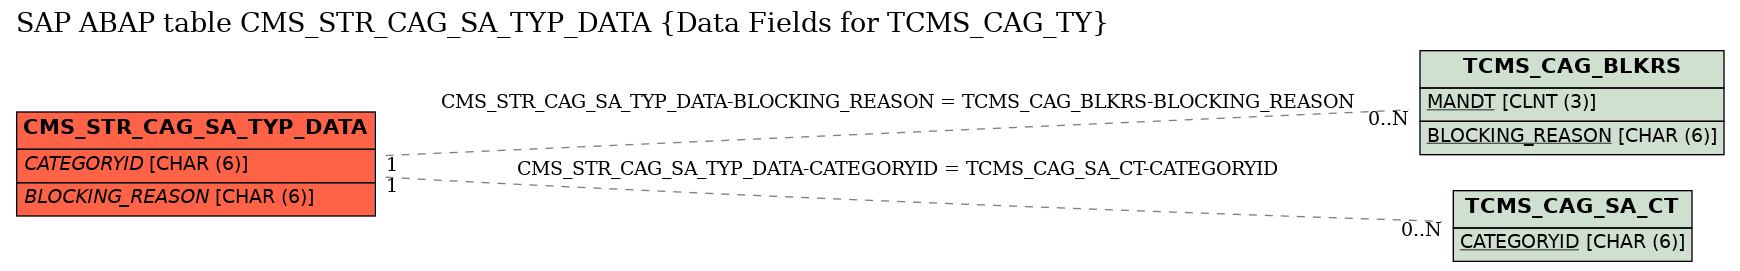 E-R Diagram for table CMS_STR_CAG_SA_TYP_DATA (Data Fields for TCMS_CAG_TY)